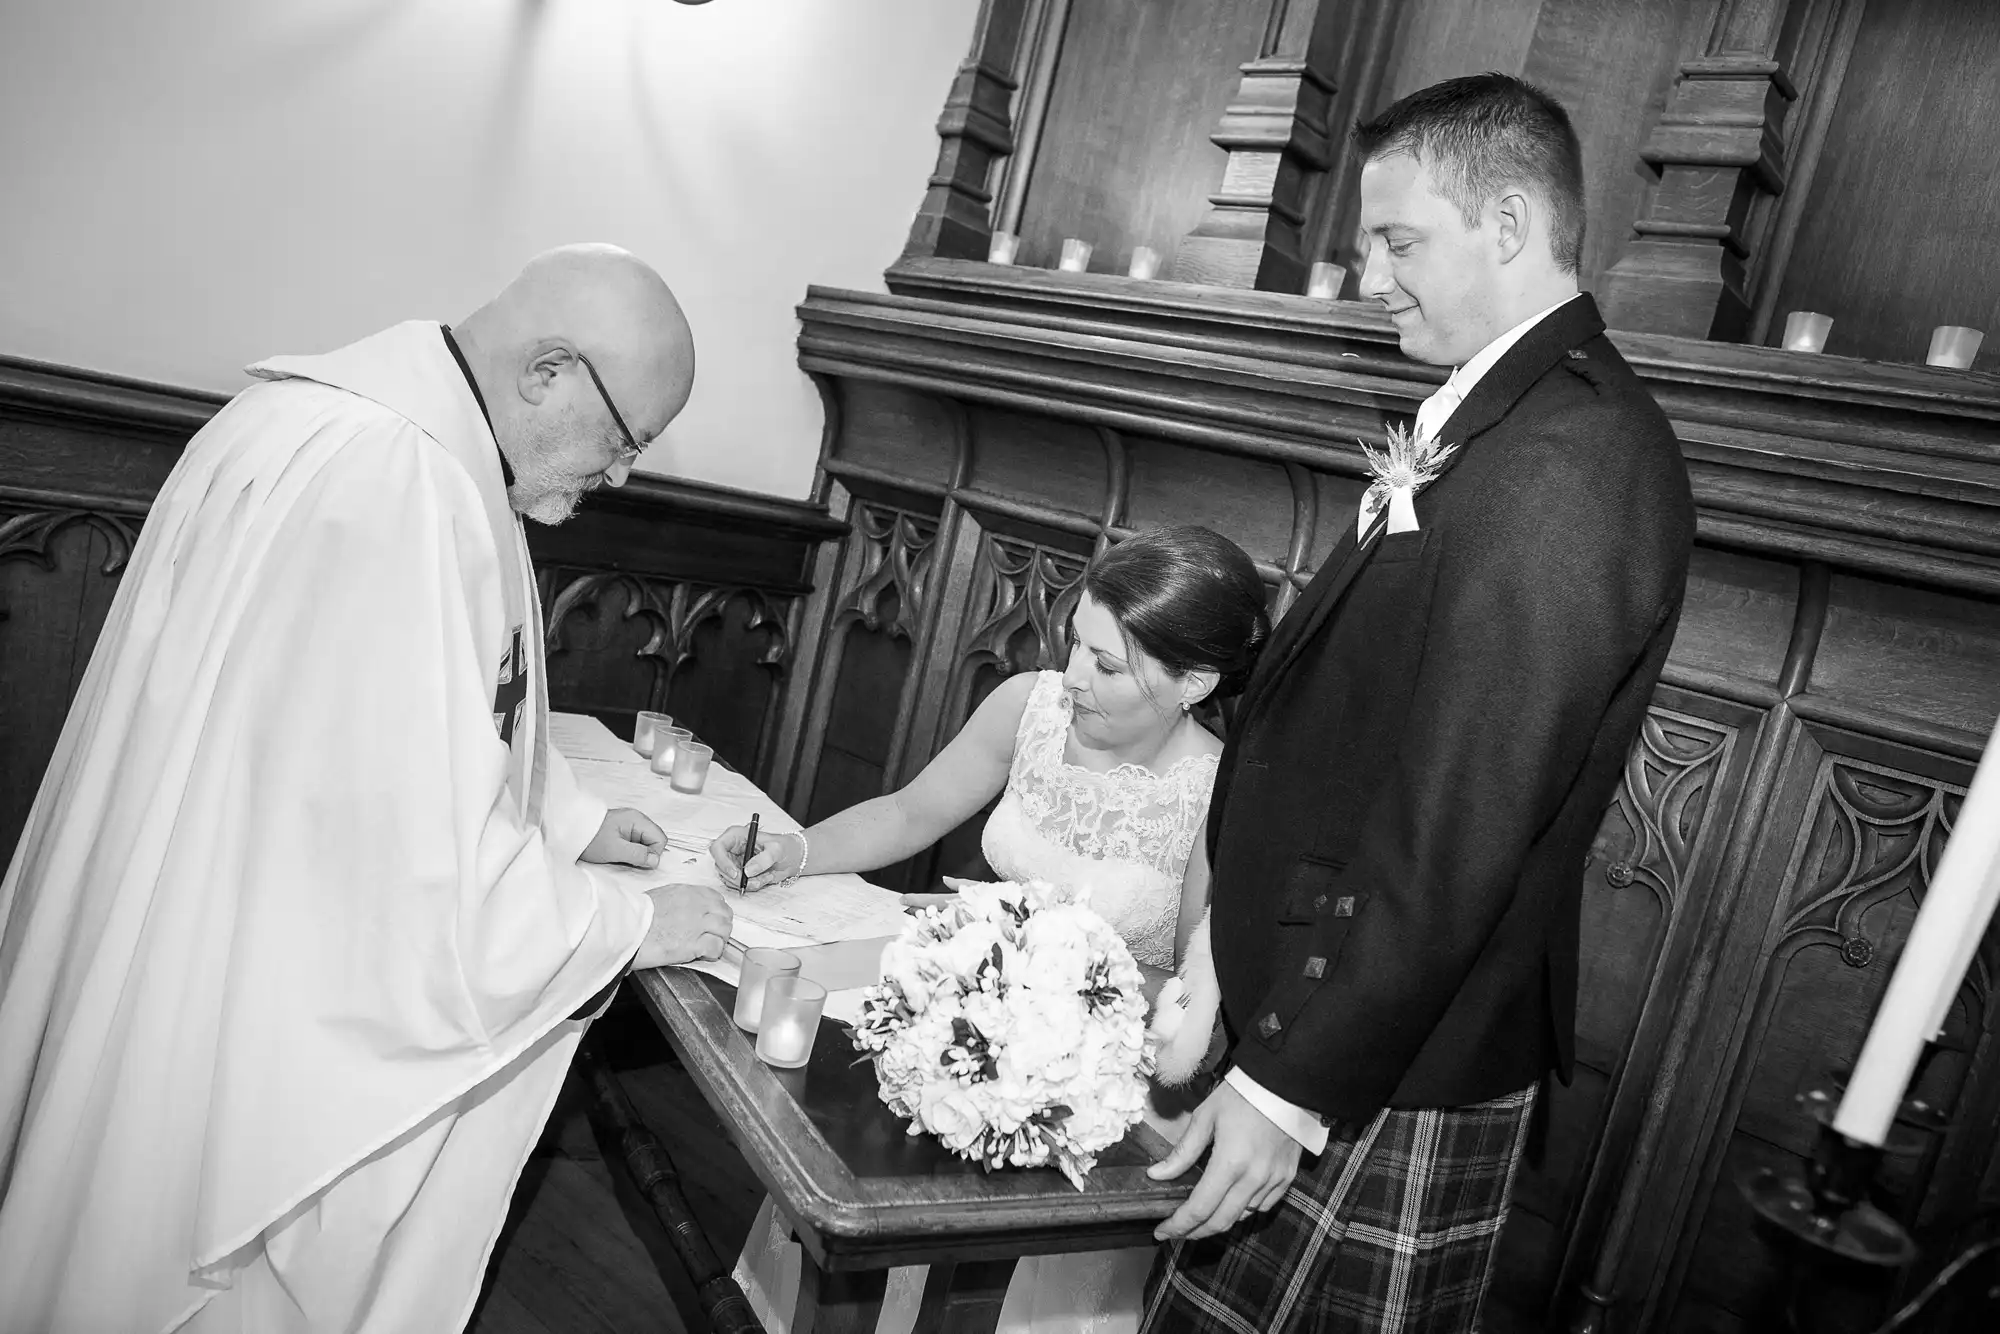 A bride and groom signing their marriage certificate at a church altar, assisted by a priest, in a black and white photo.